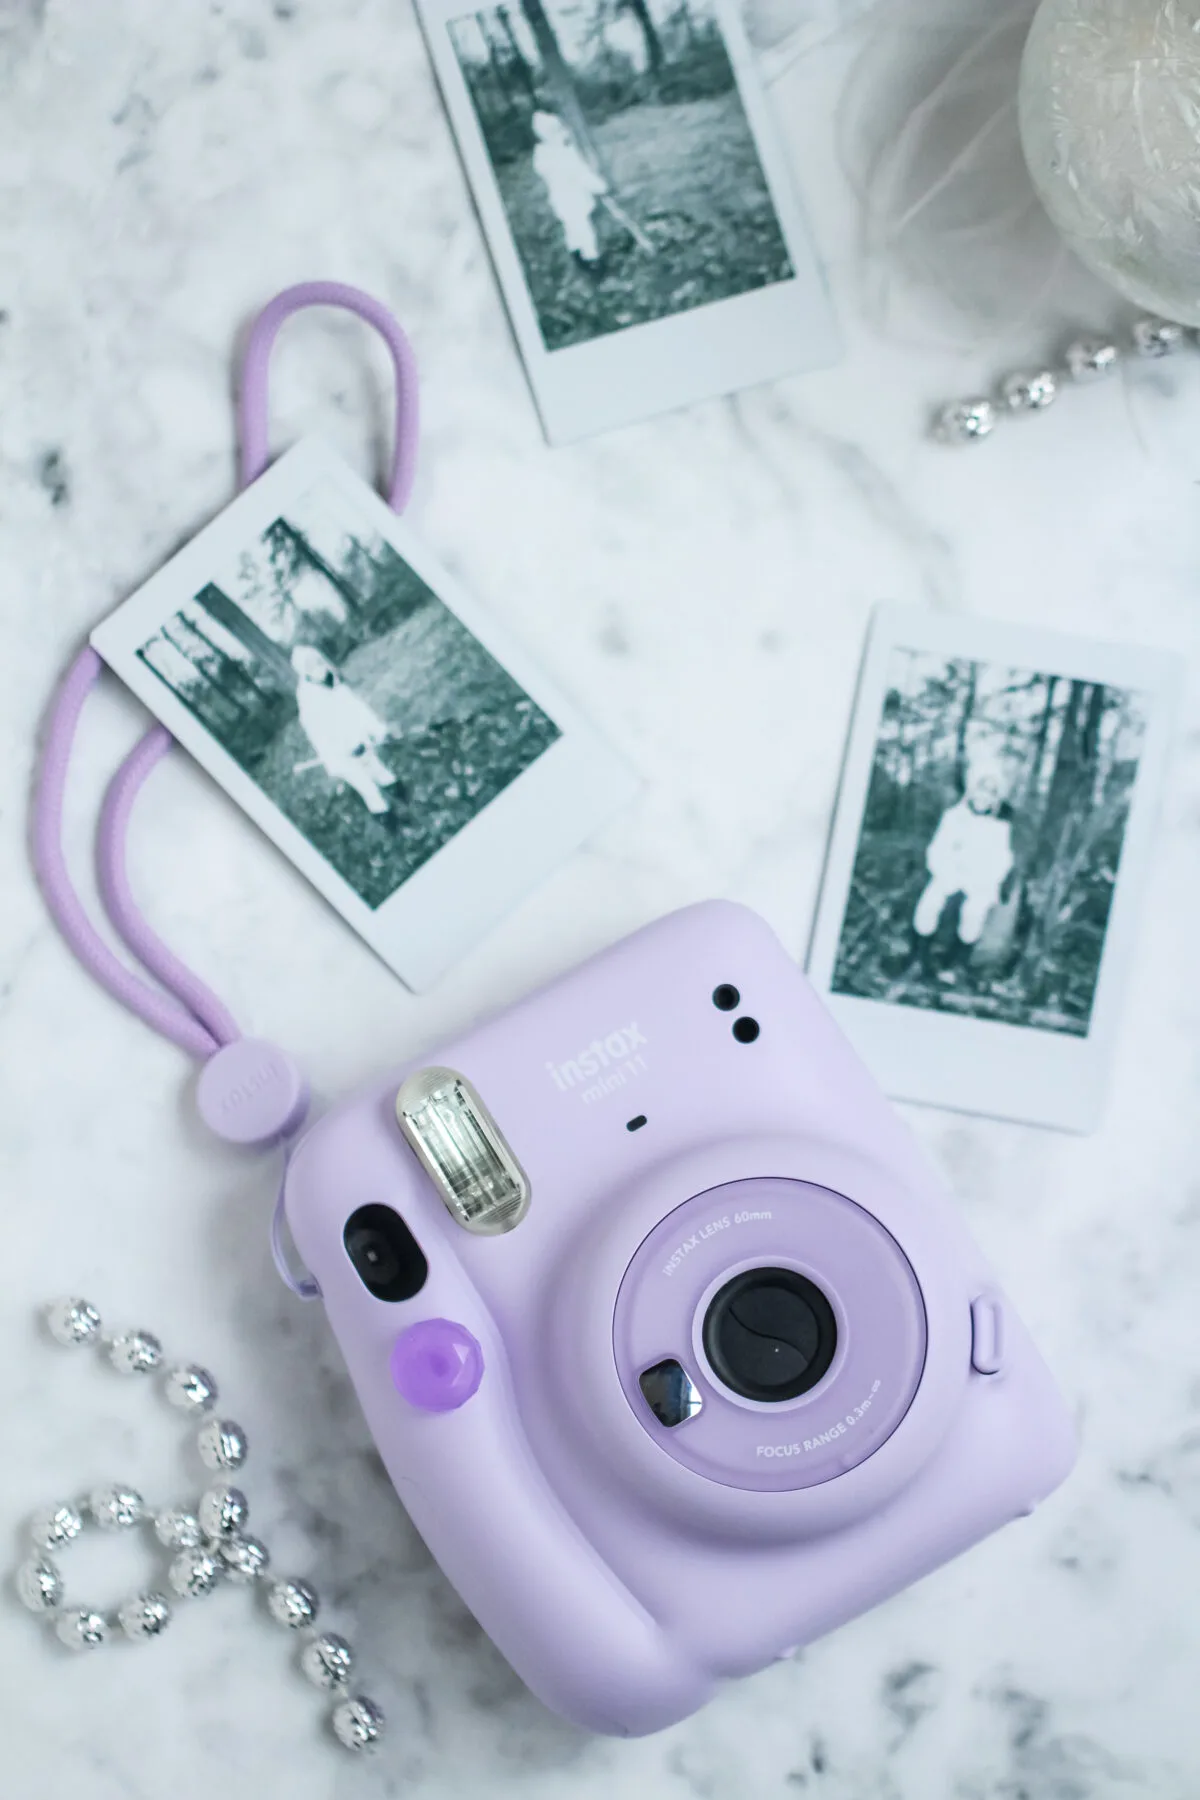 Snap a pic and go! The Fujifilm INSTAX Mini 11 instant camera is easy to use, with features that will have you capturing memories in no time.